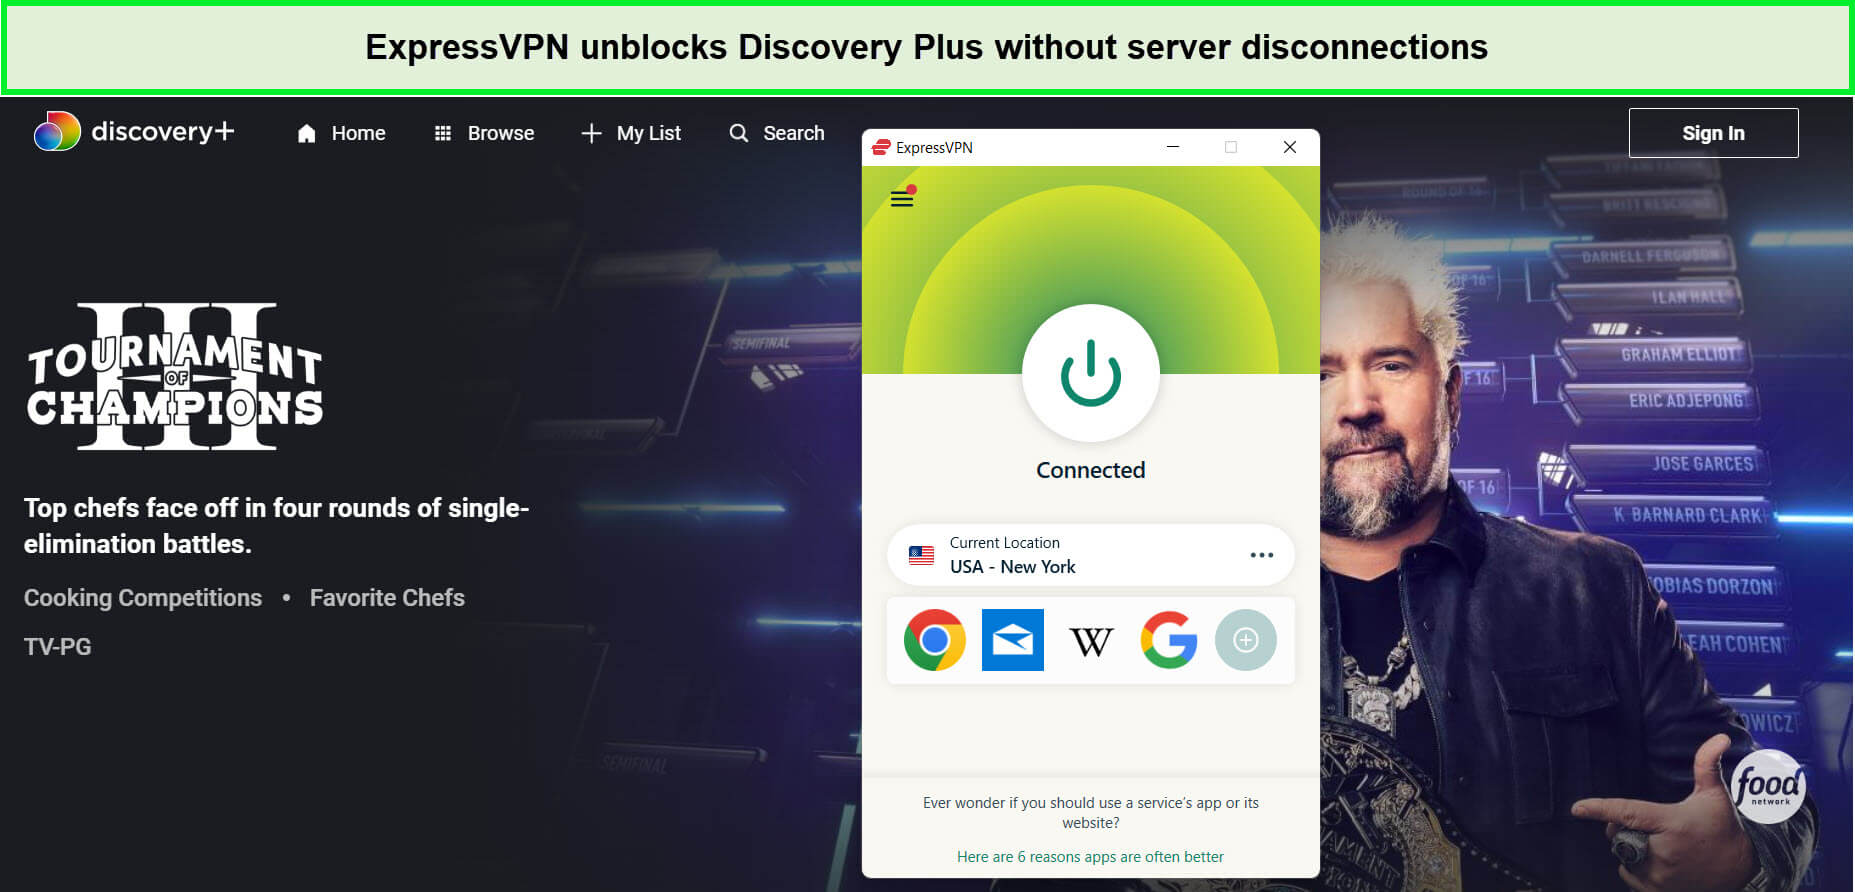 expressvpn-unblocks-tournament-of-champions-season-4-on-discovery-plus-in-nz